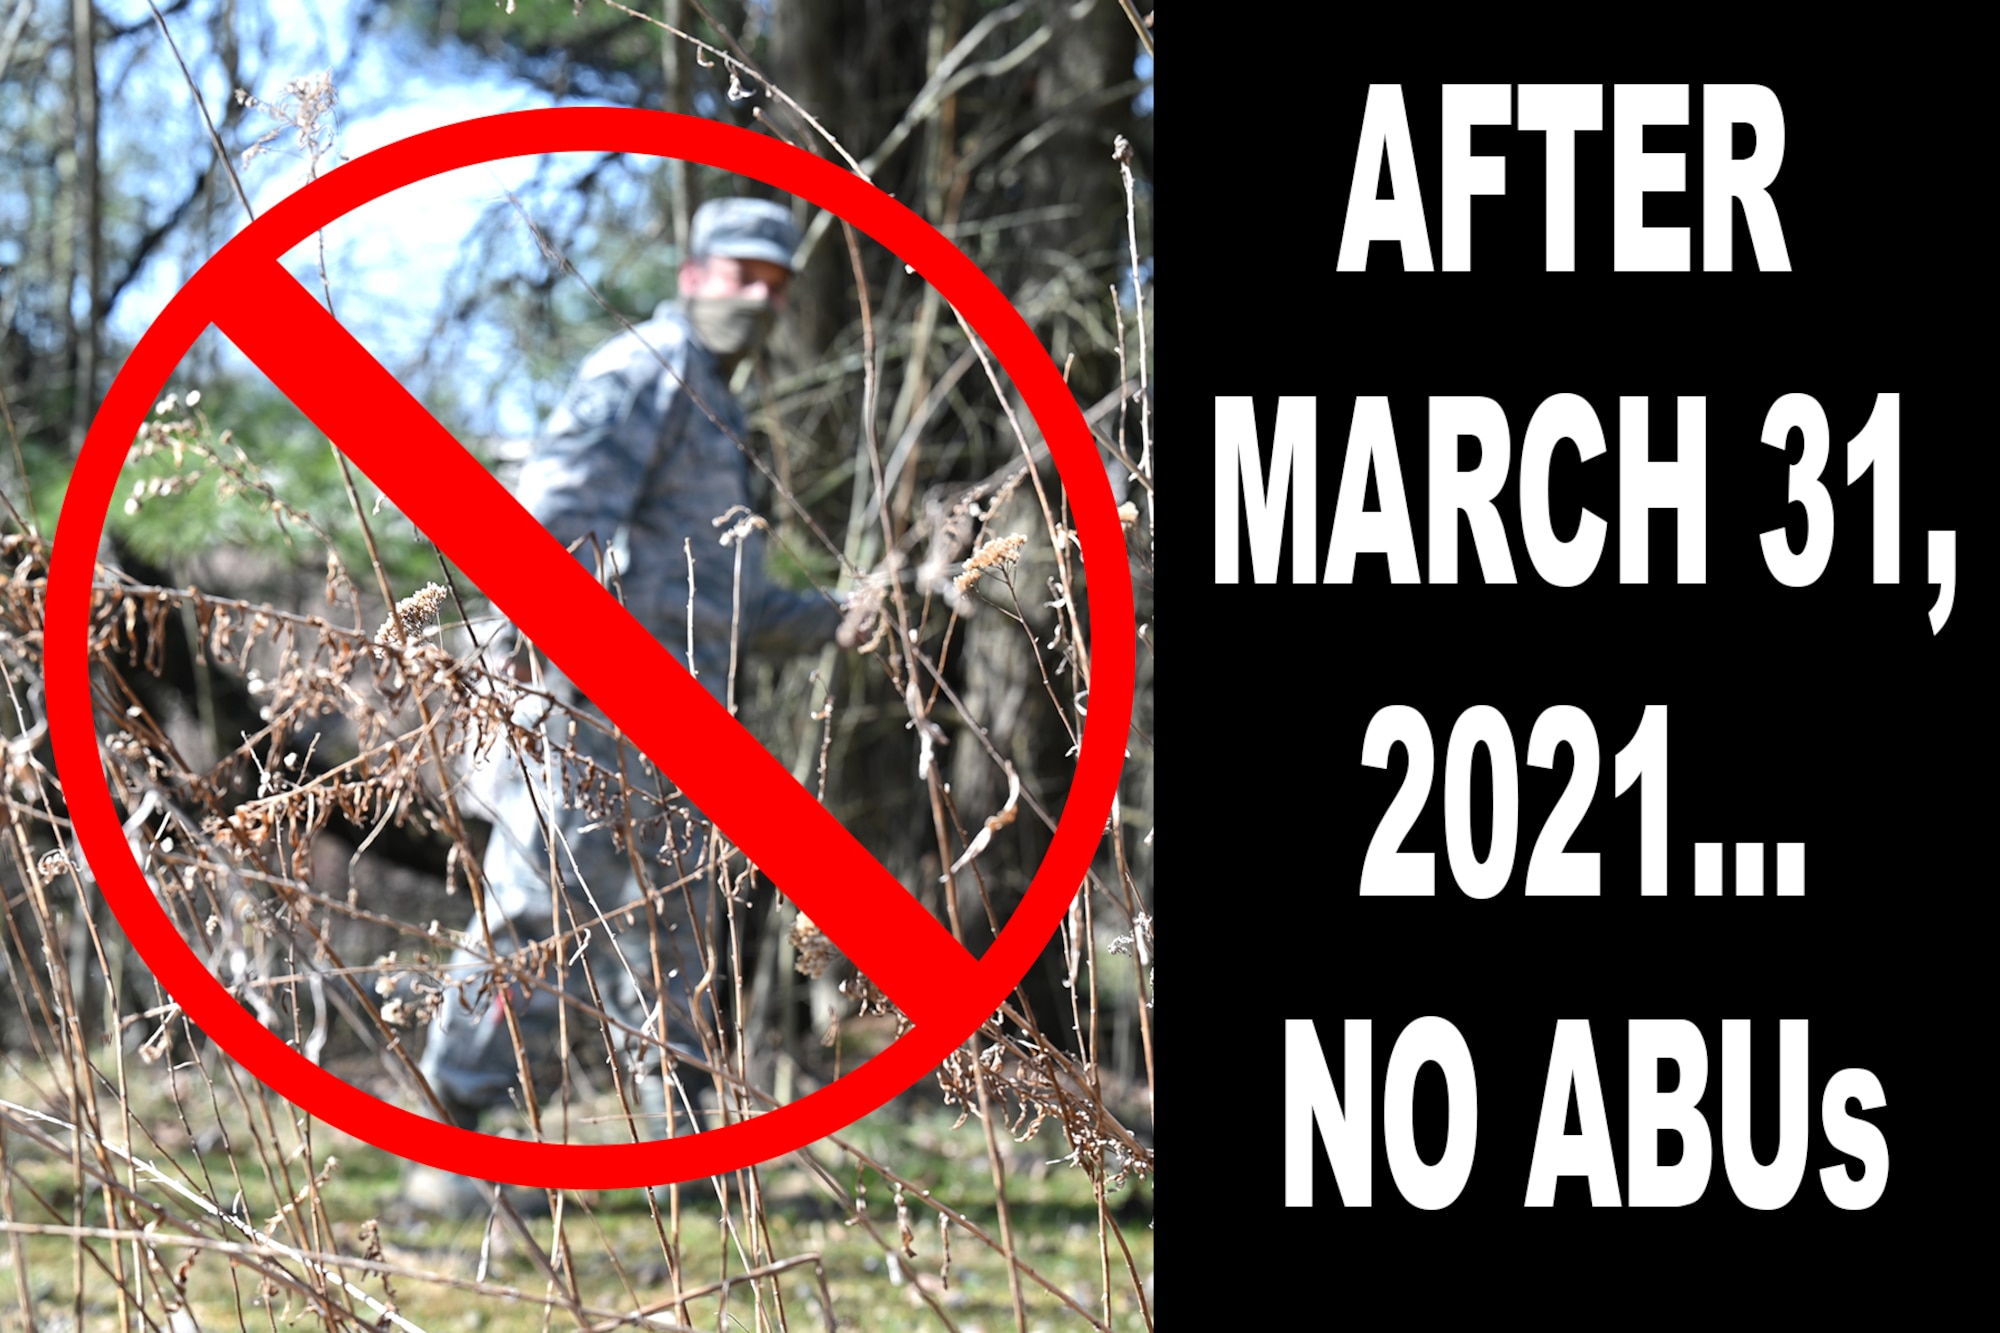 April 1, 2021 is the mandatory wear date for the Operational Camouflage Pattern uniform for Airmen in all components of the Department of the Air Force, according to Air Force Instruction 36-2903 Dress and Appearance, Chapter 5 Utility Uniforms.